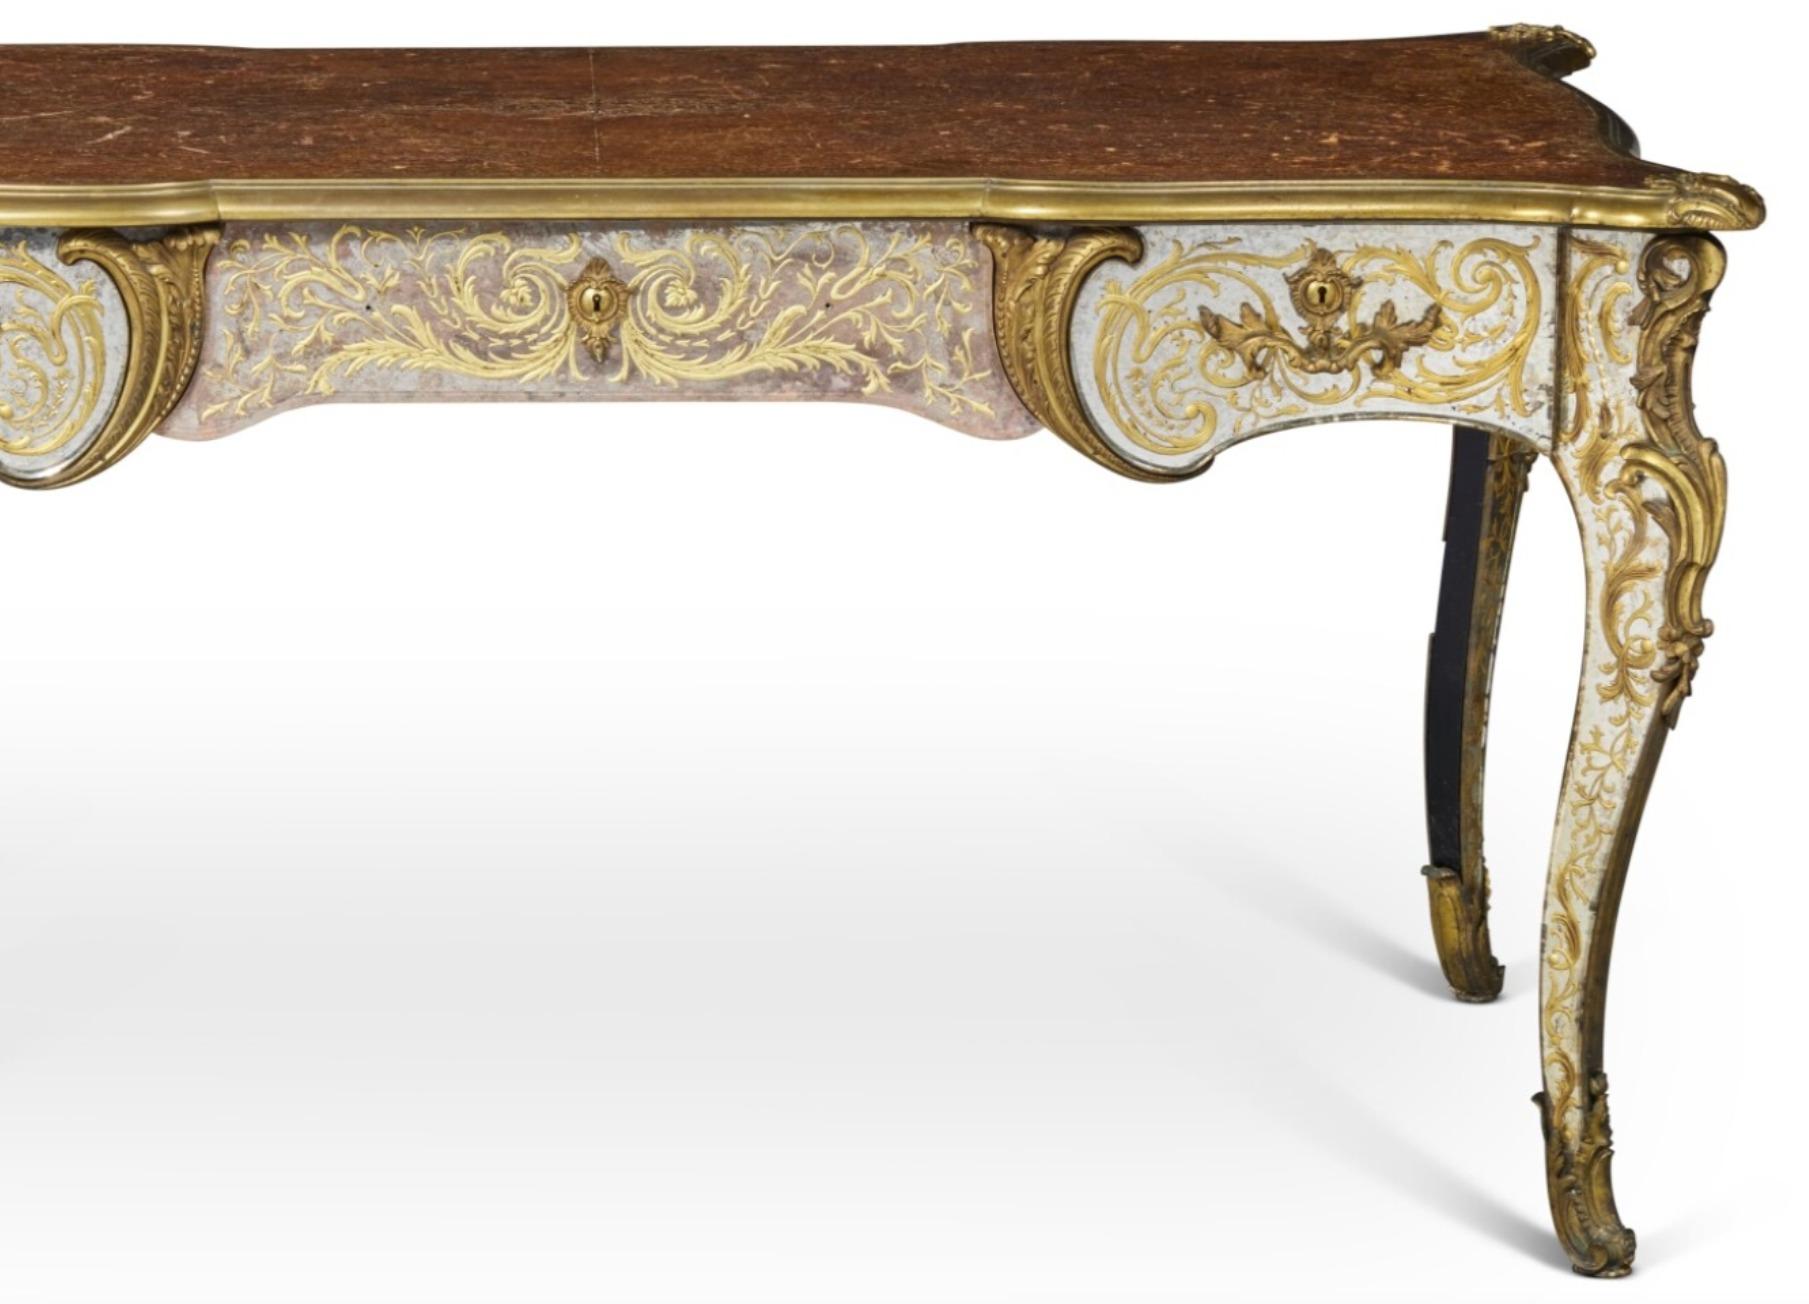 French The Duke and Duchess of Windsor: An Exquisite Ormolu and Églomisé Bureau Plat For Sale